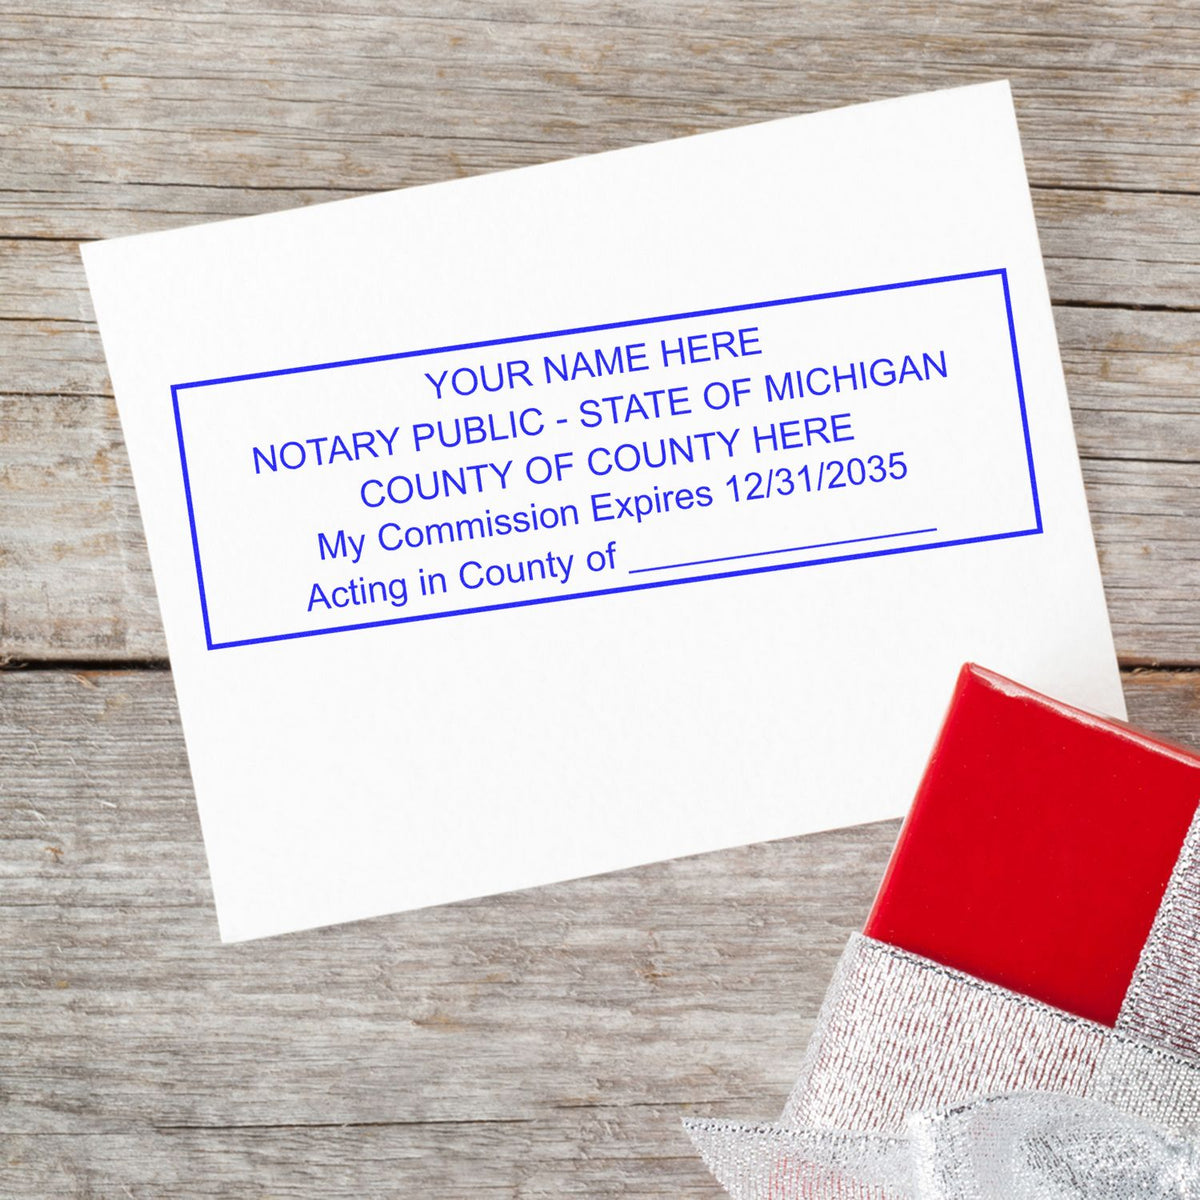 An alternative view of the Super Slim Michigan Notary Public Stamp stamped on a sheet of paper showing the image in use